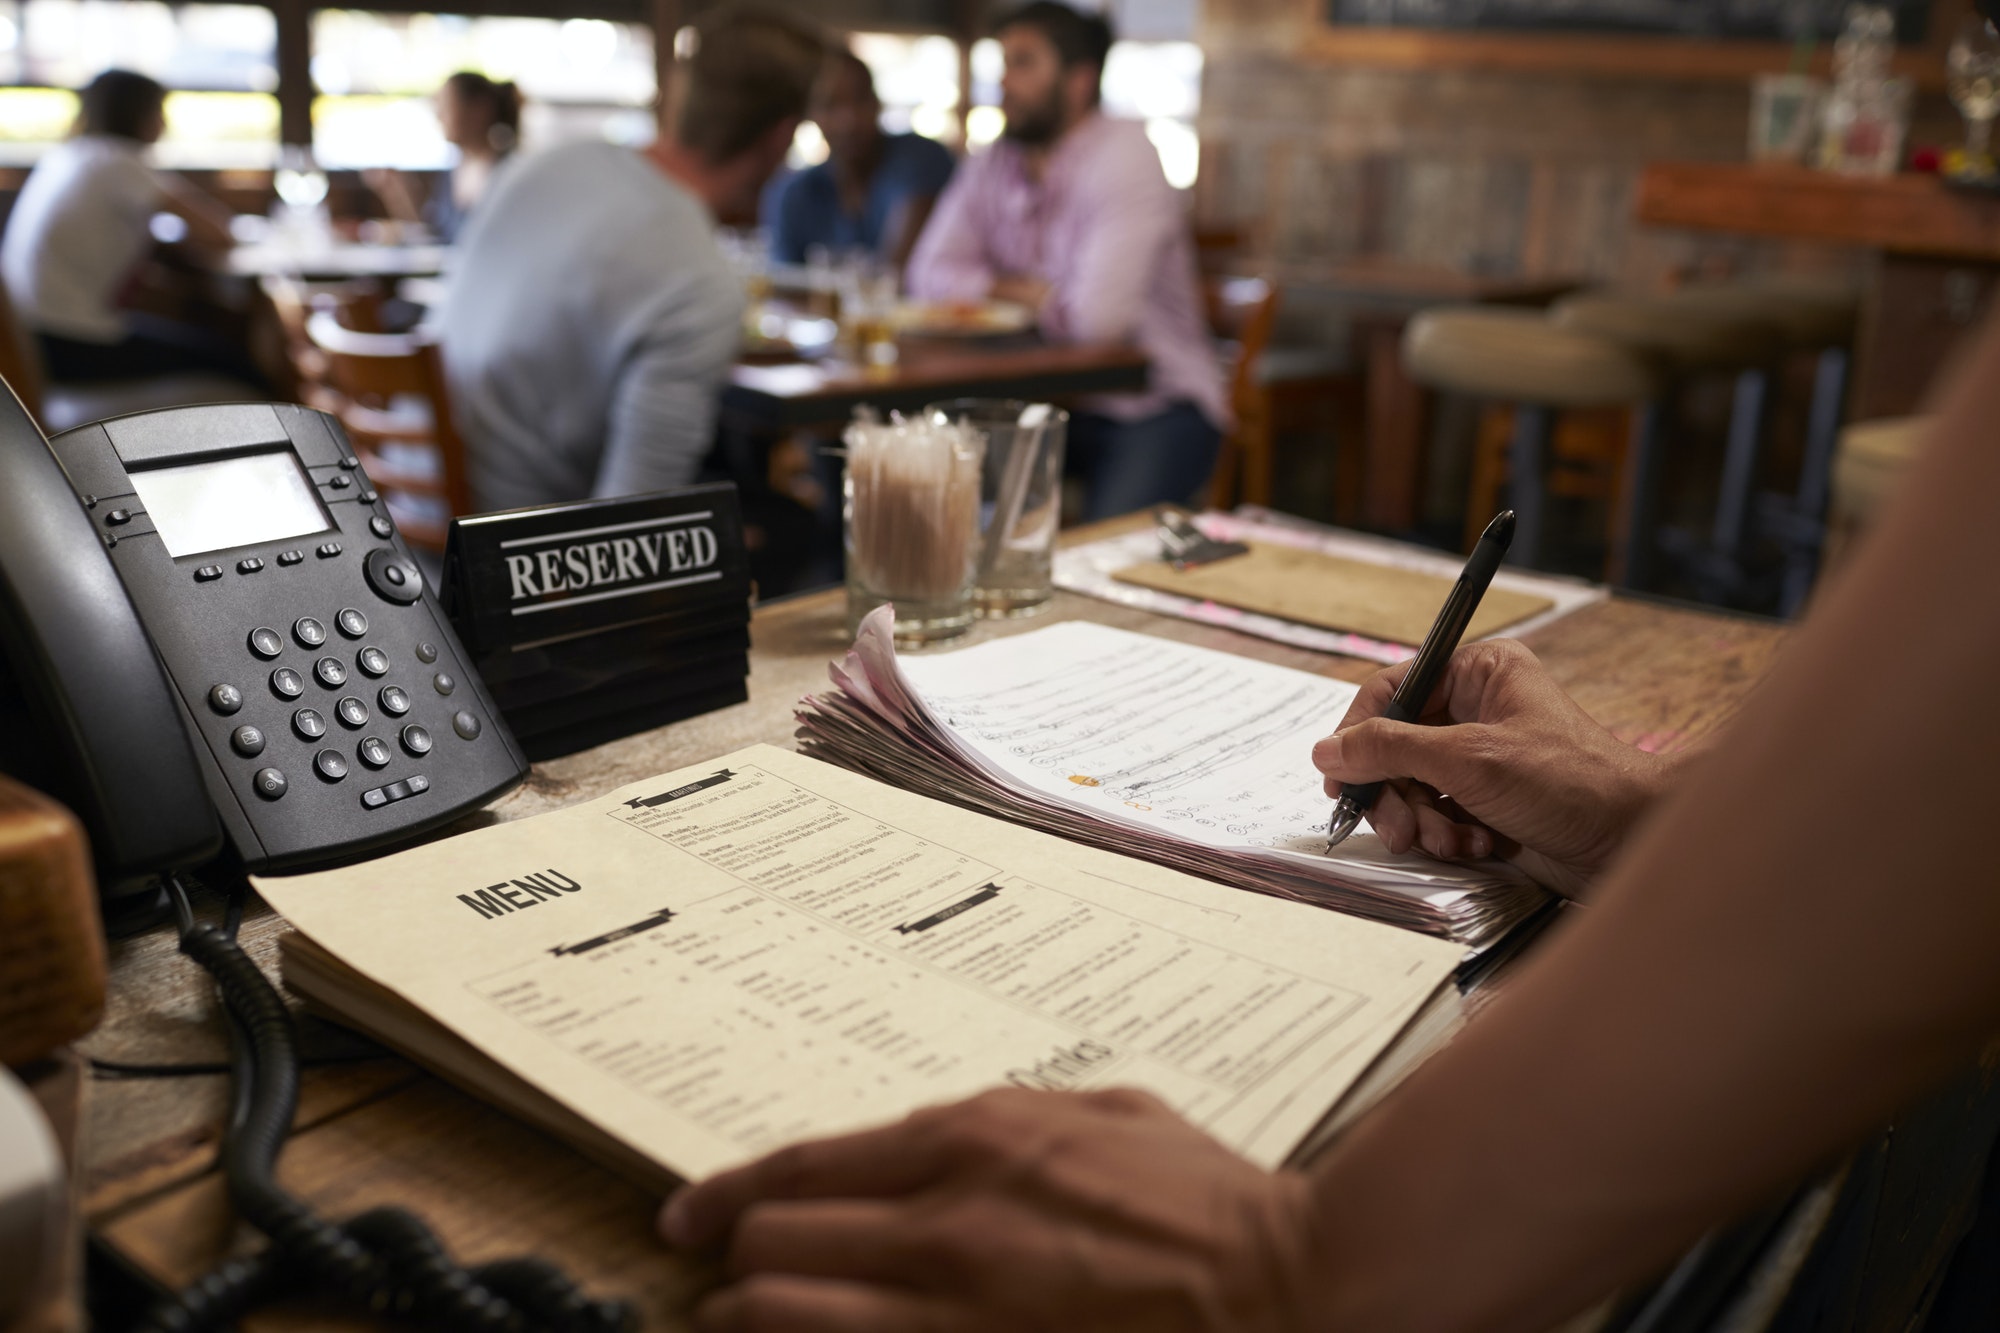 Employee at a restaurant writing down a table reservation